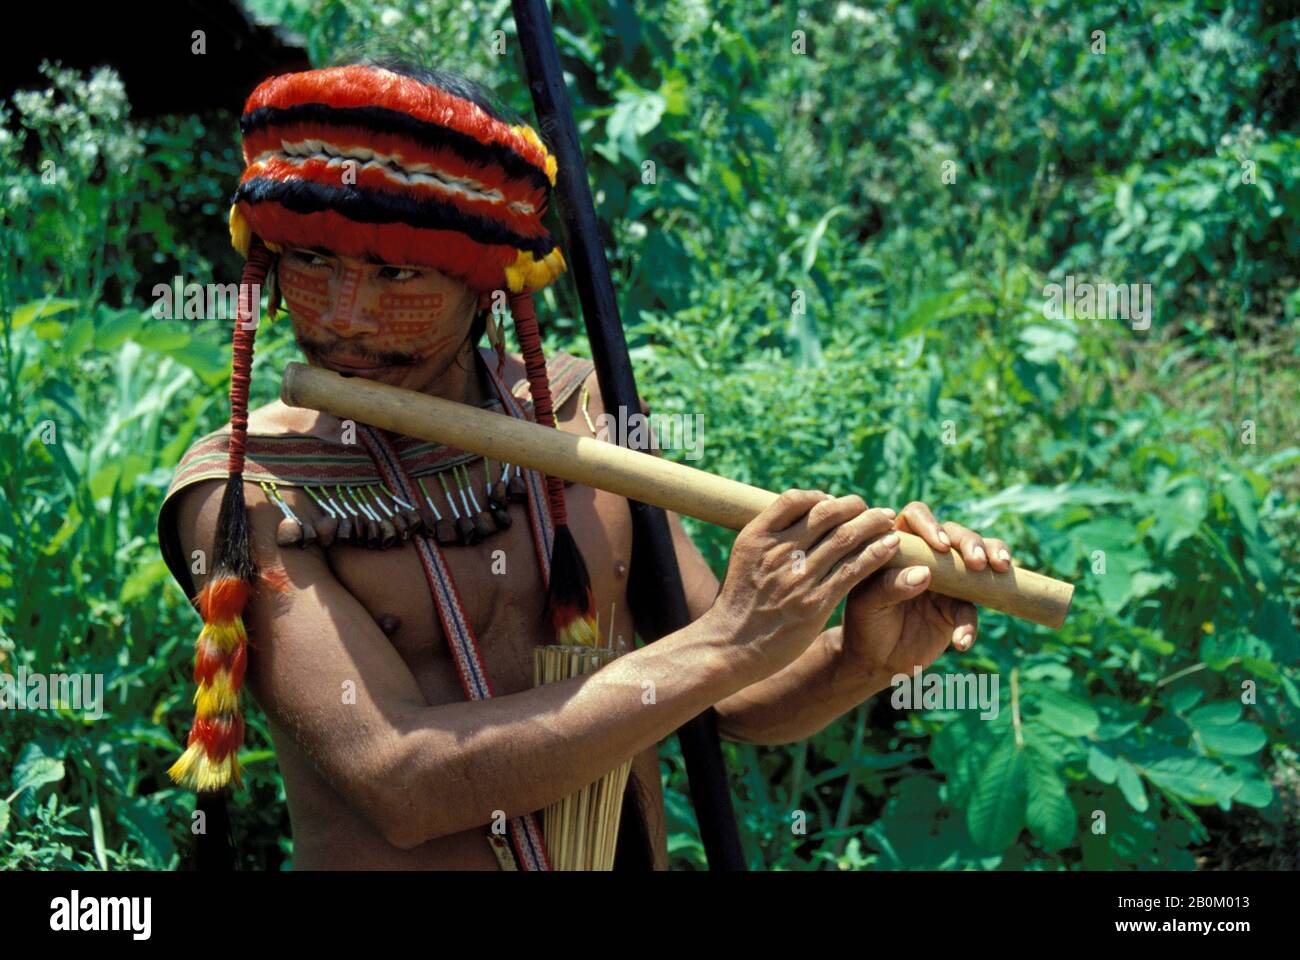 Indians Amazon River High Resolution Stock Photography and Images - Alamy